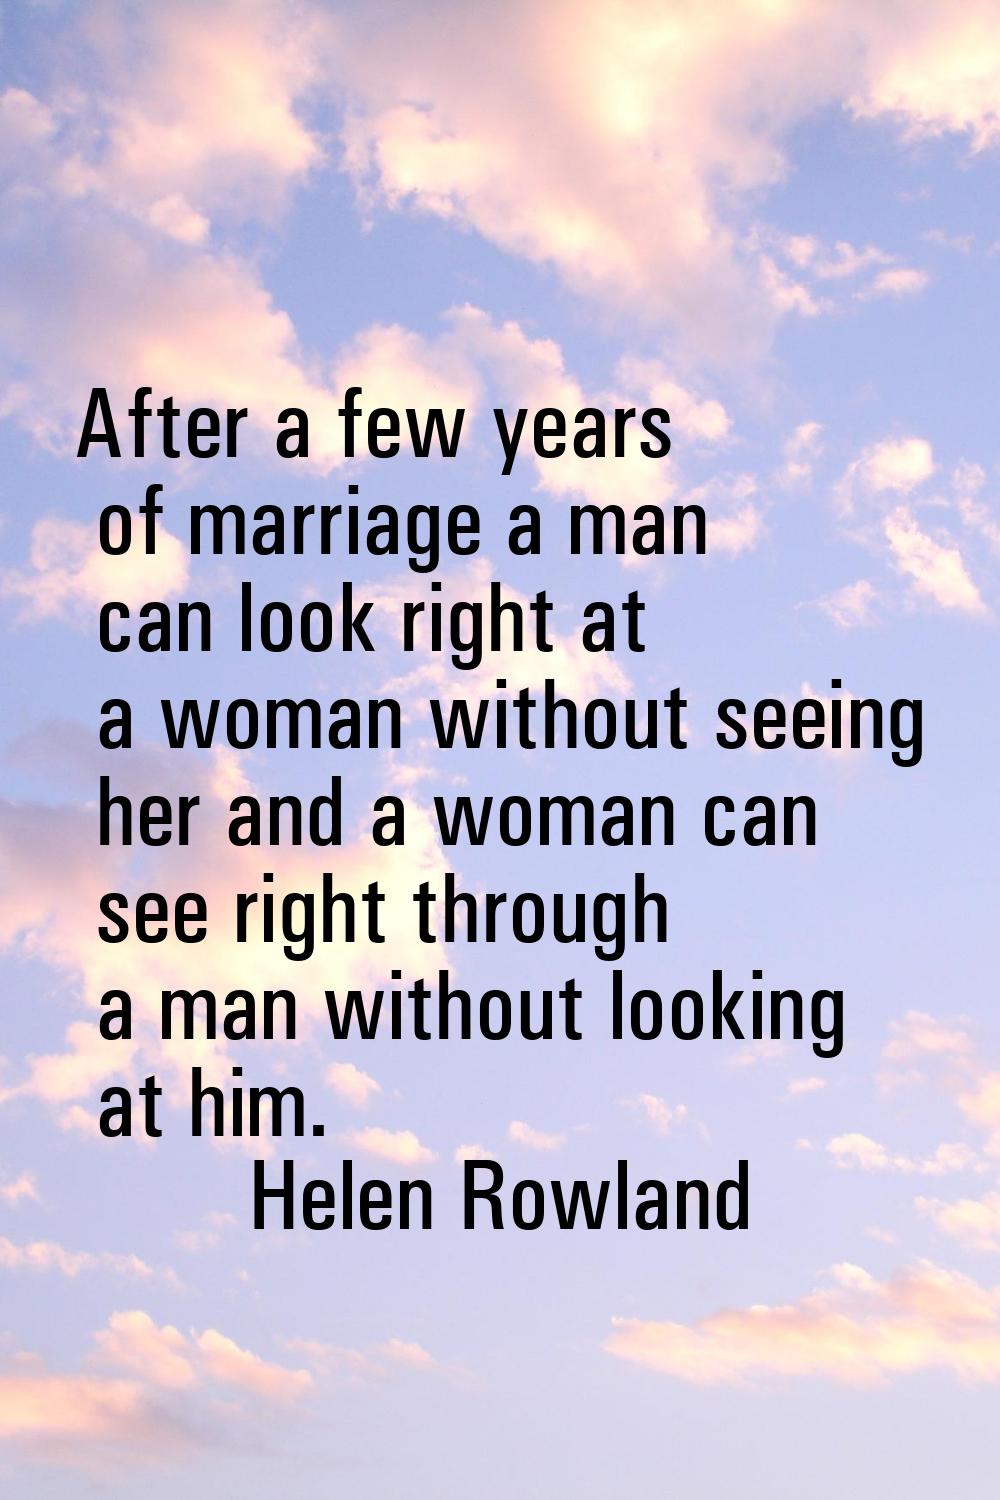 After a few years of marriage a man can look right at a woman without seeing her and a woman can se